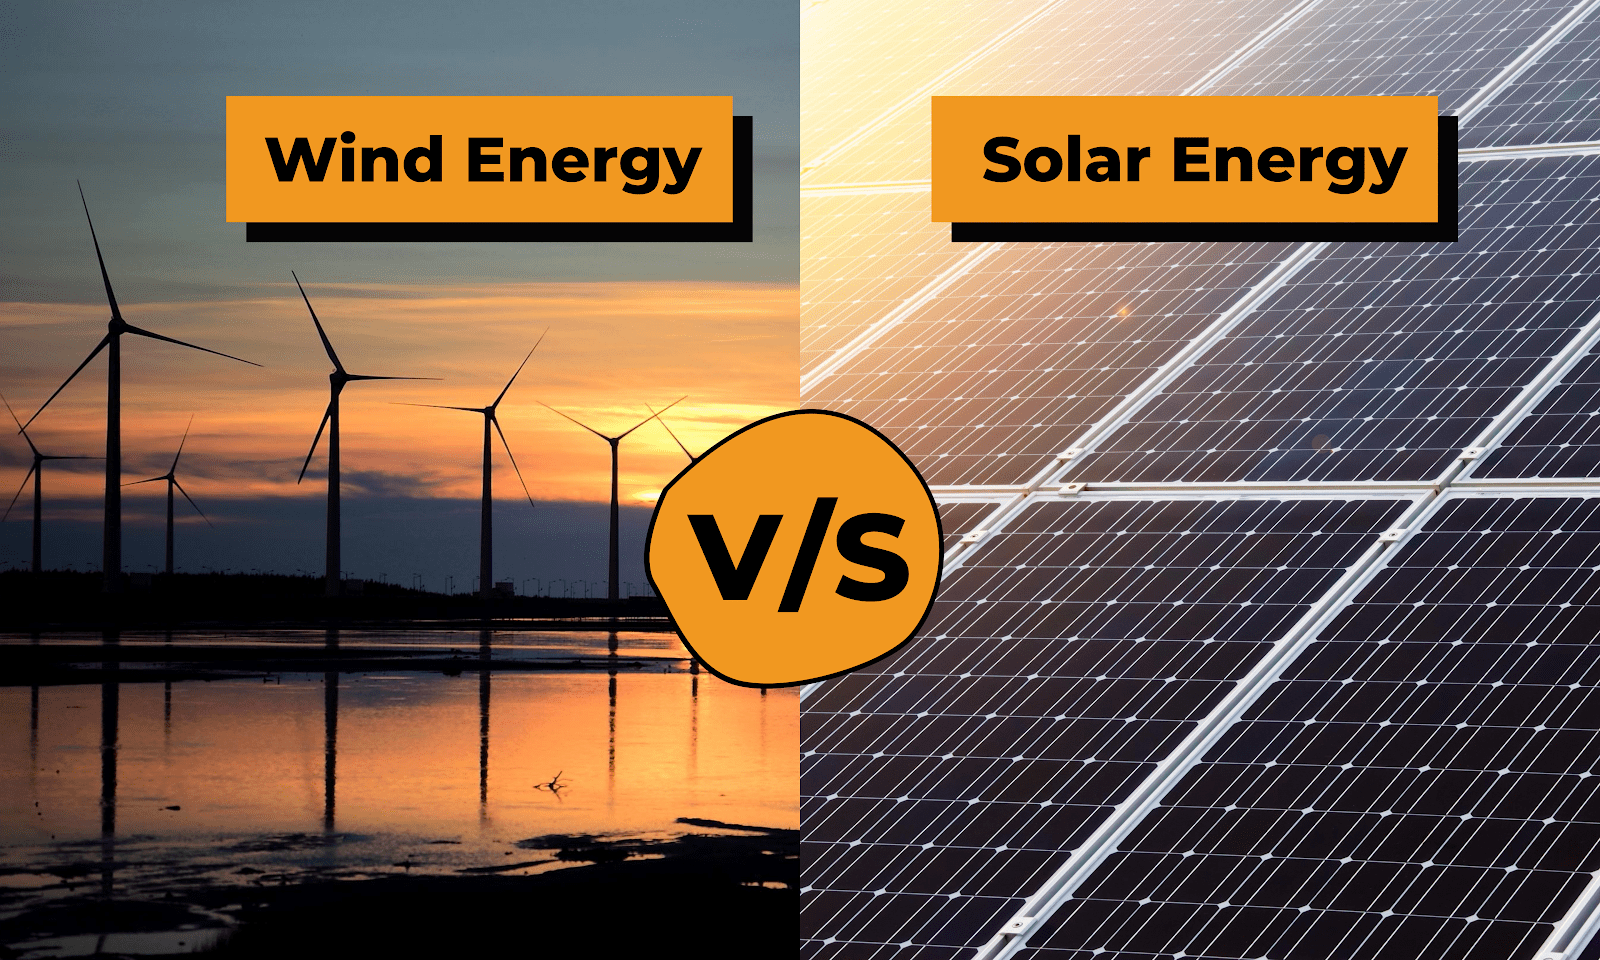 Solar vs Wind Energy: Which one is better in 2022?